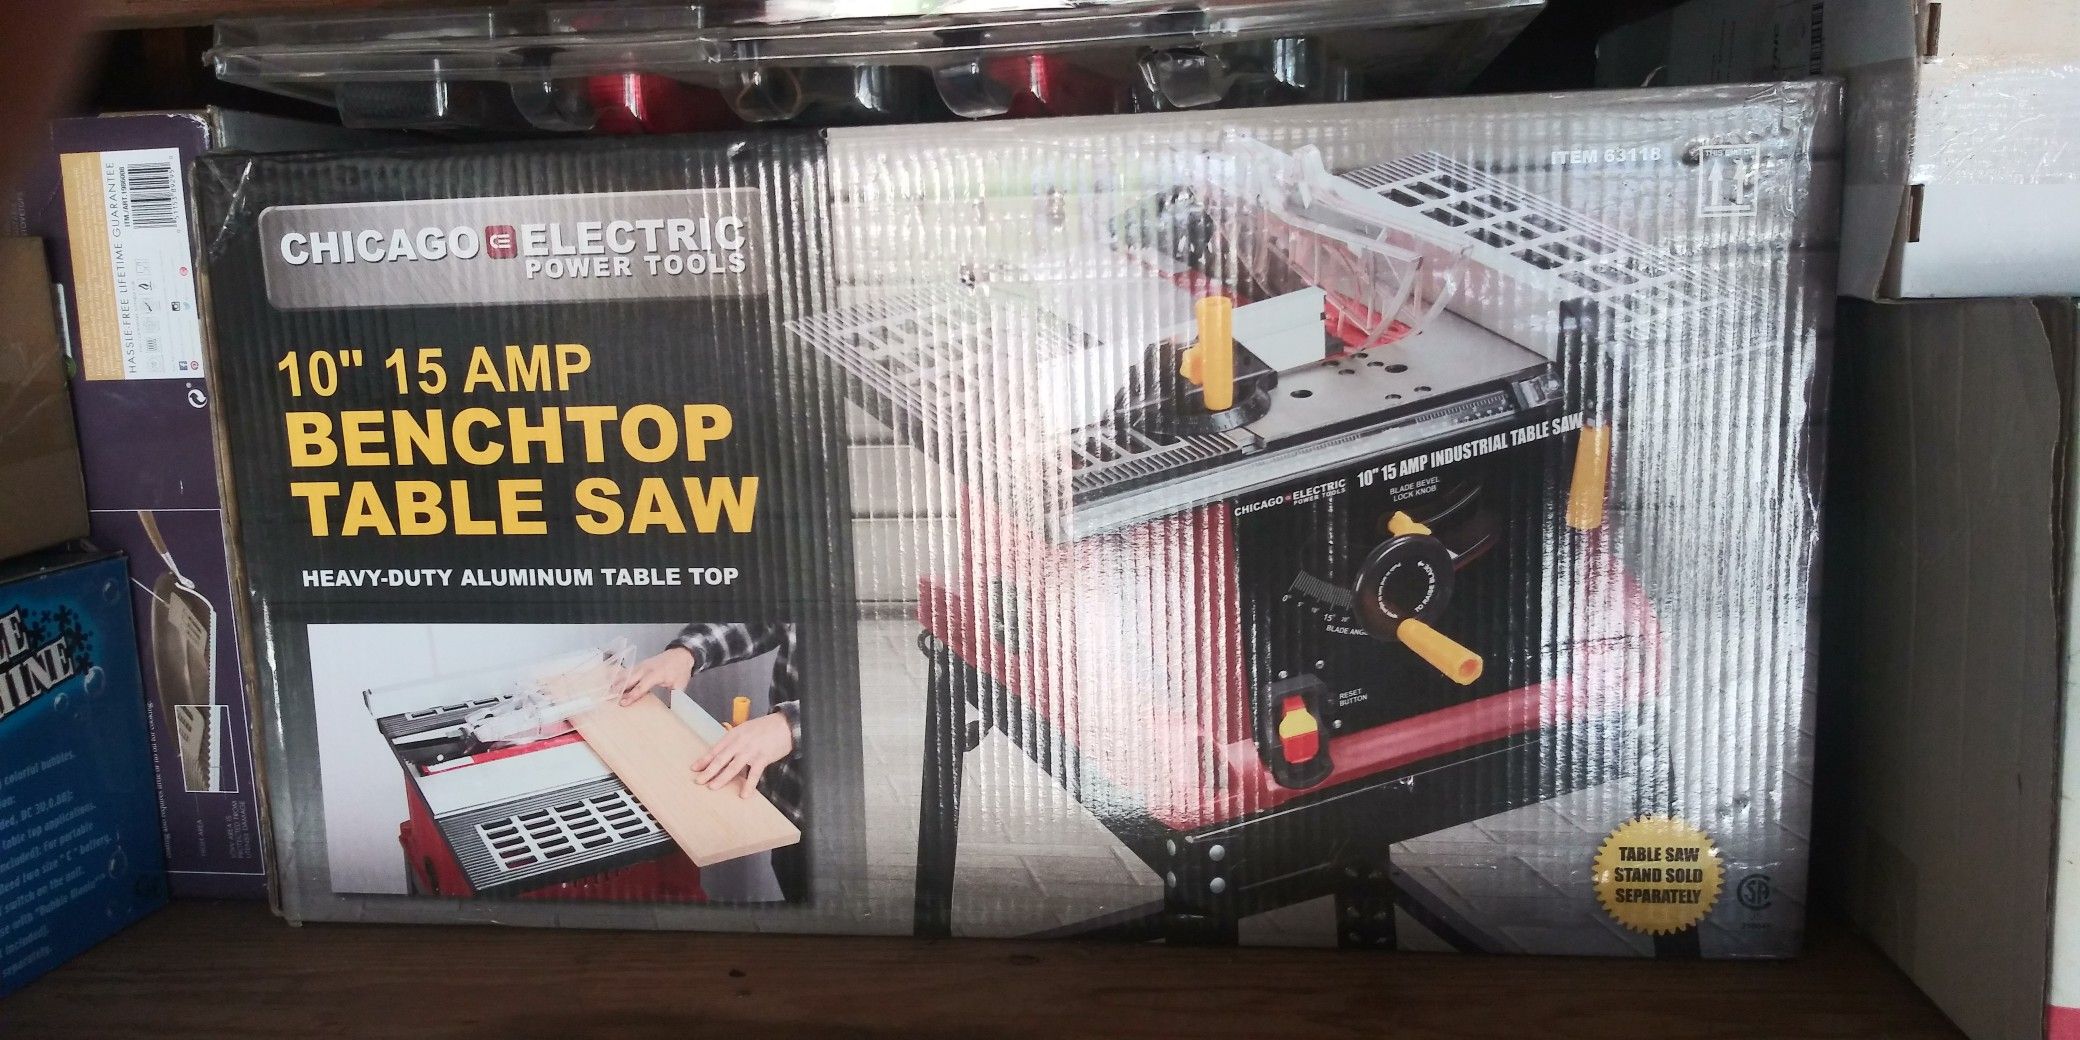 Chicago Electric 10" 15 Amp Benchtop Table Saw